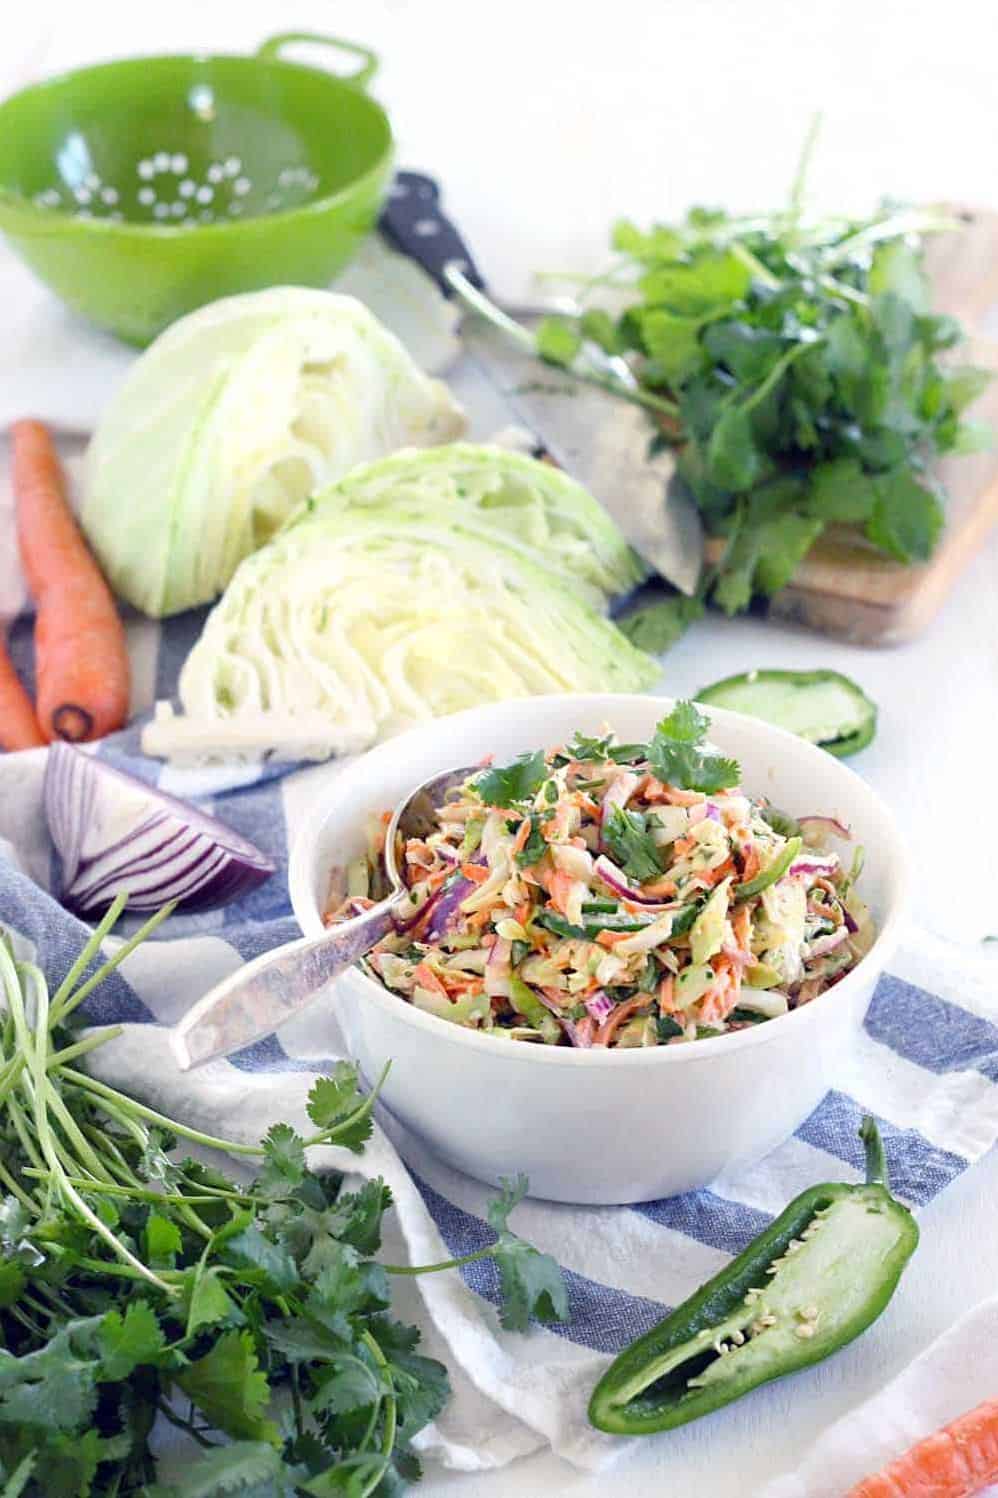  Toss together this slaw for a refreshing addition to any meal.